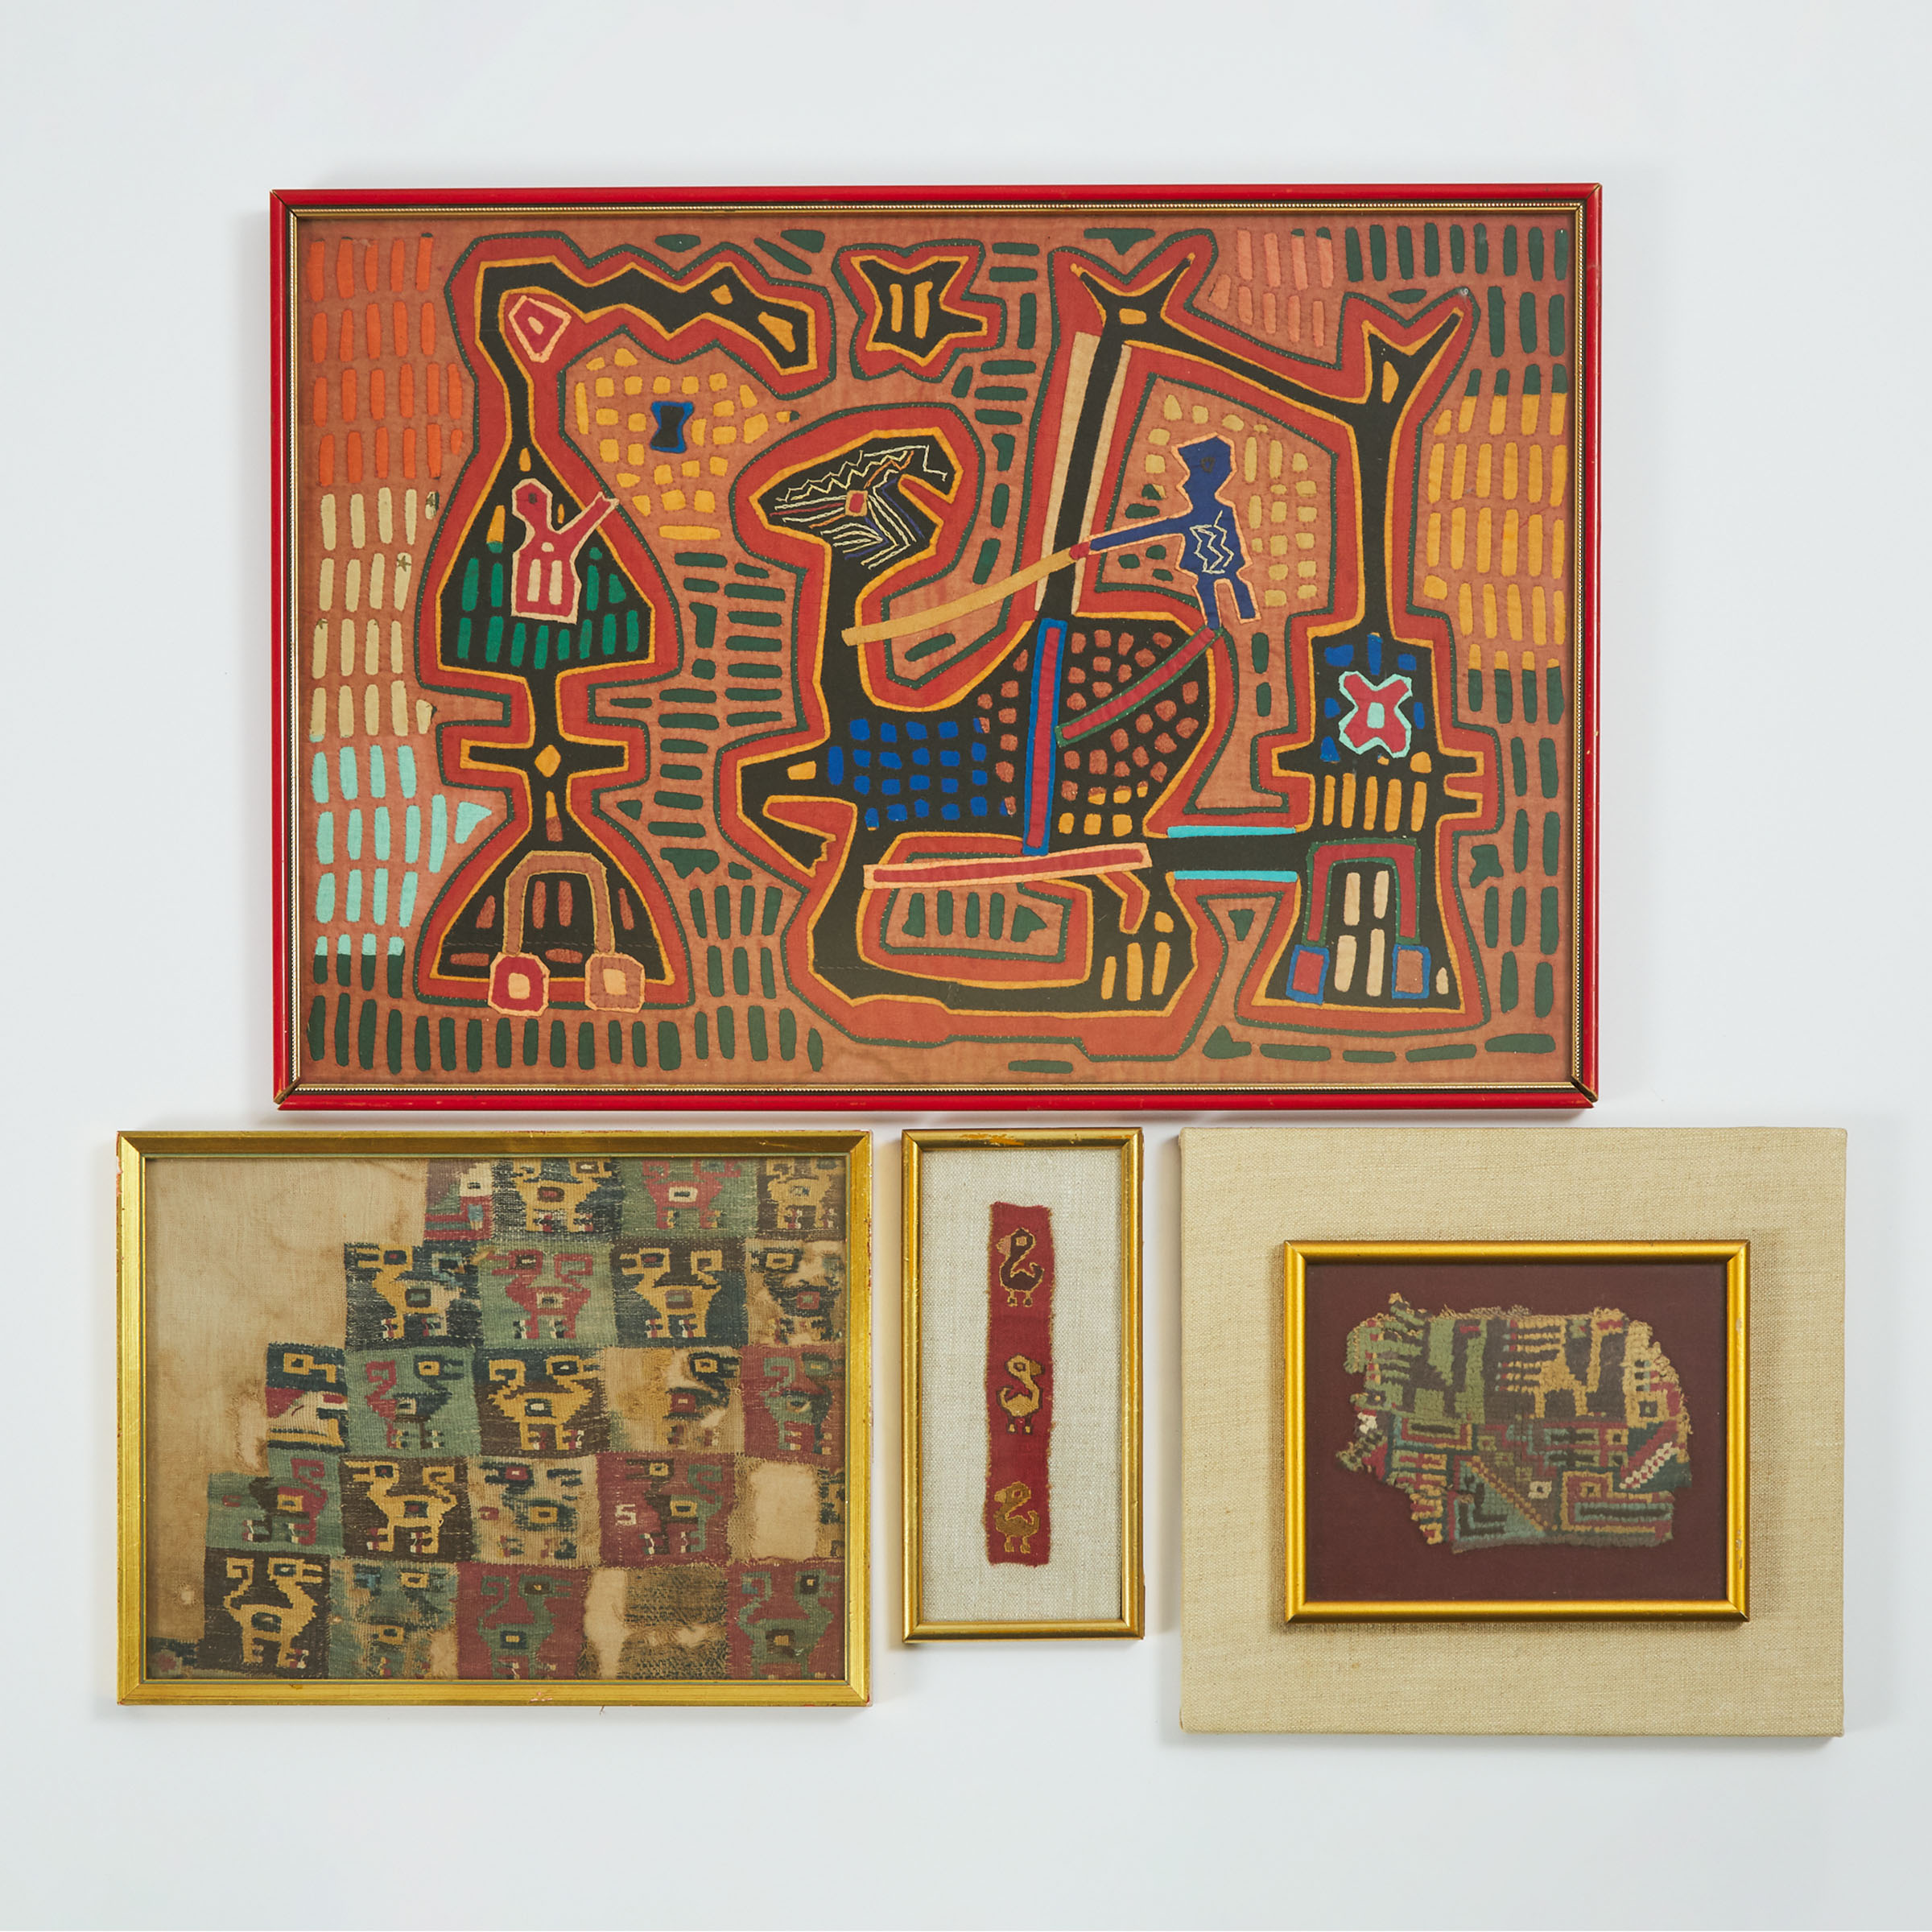 Group of Three Pre-Columbian Framed Textiles c.1450 or earlier  together with a Framed Panamanian Mola Textile, late 19th to early 20th century